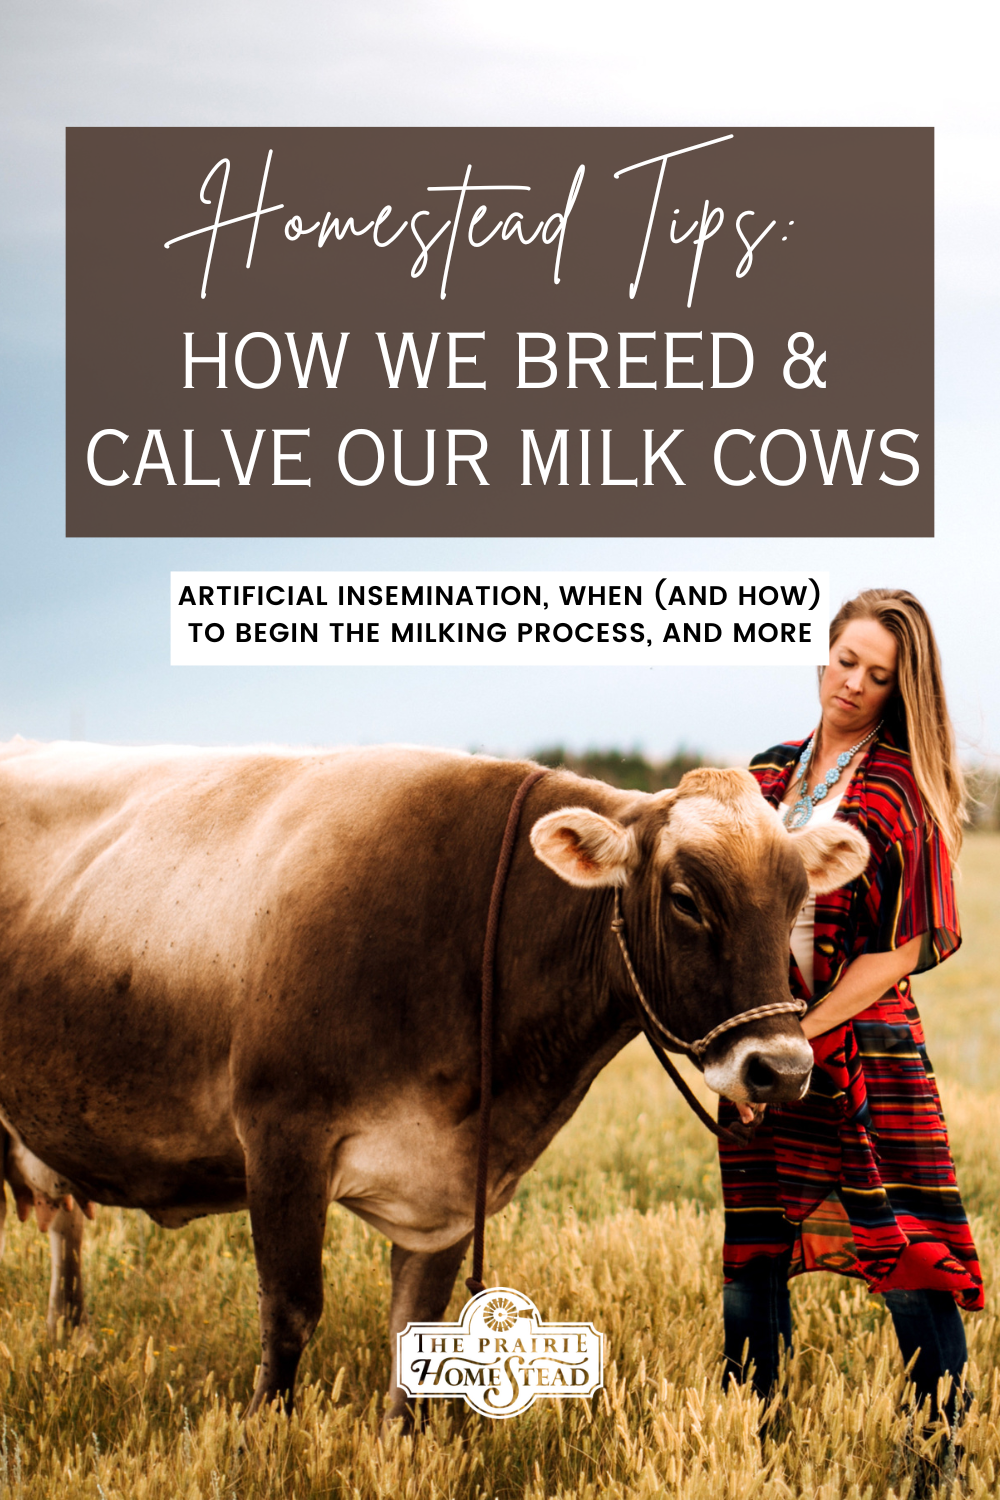 How We Breed & Calve Our Milk Cows